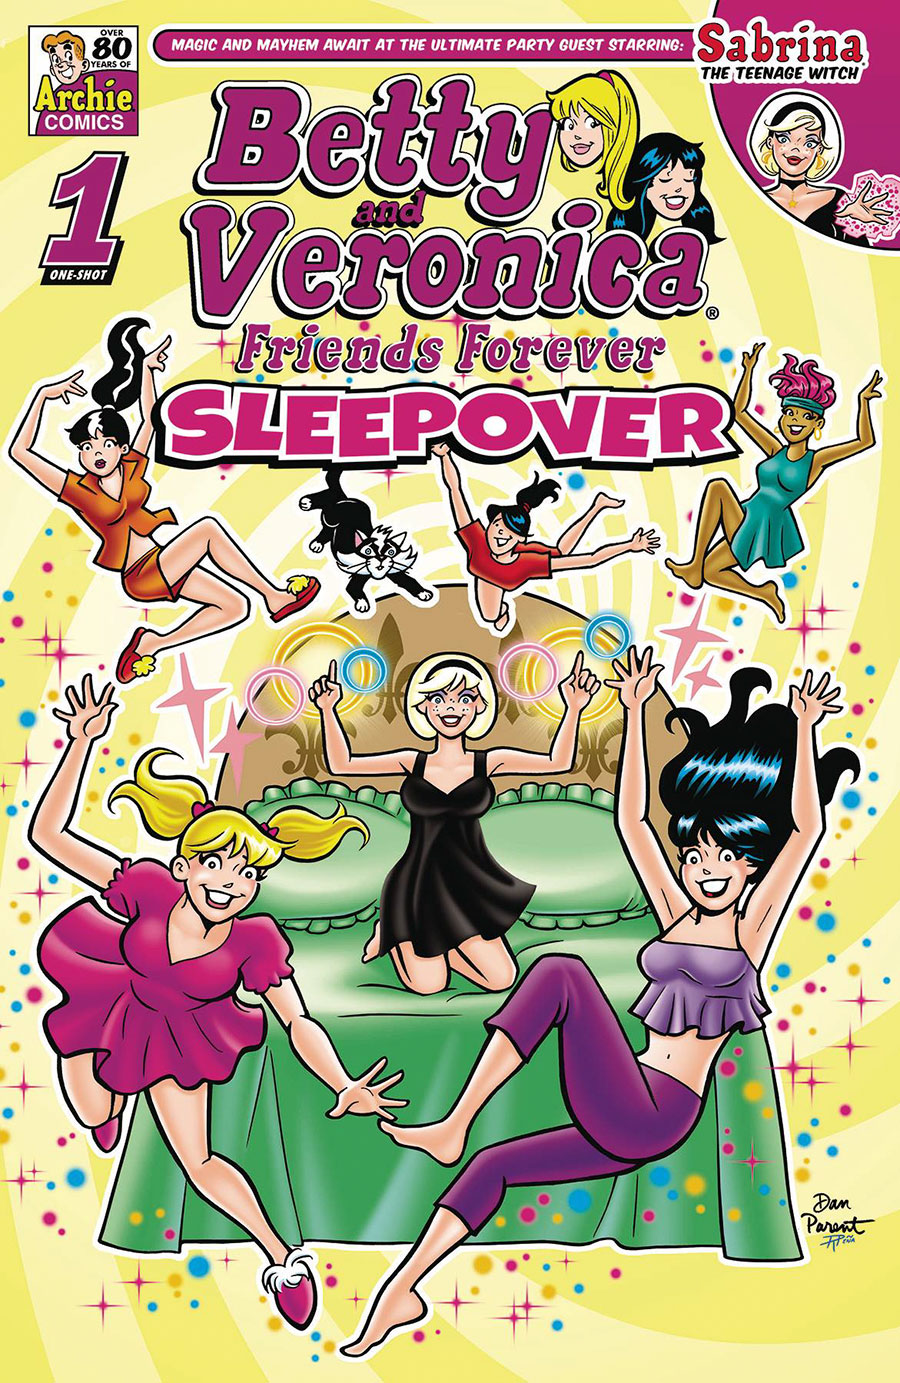 Betty & Veronica Friends Forever Sleepover #1 (One Shot)